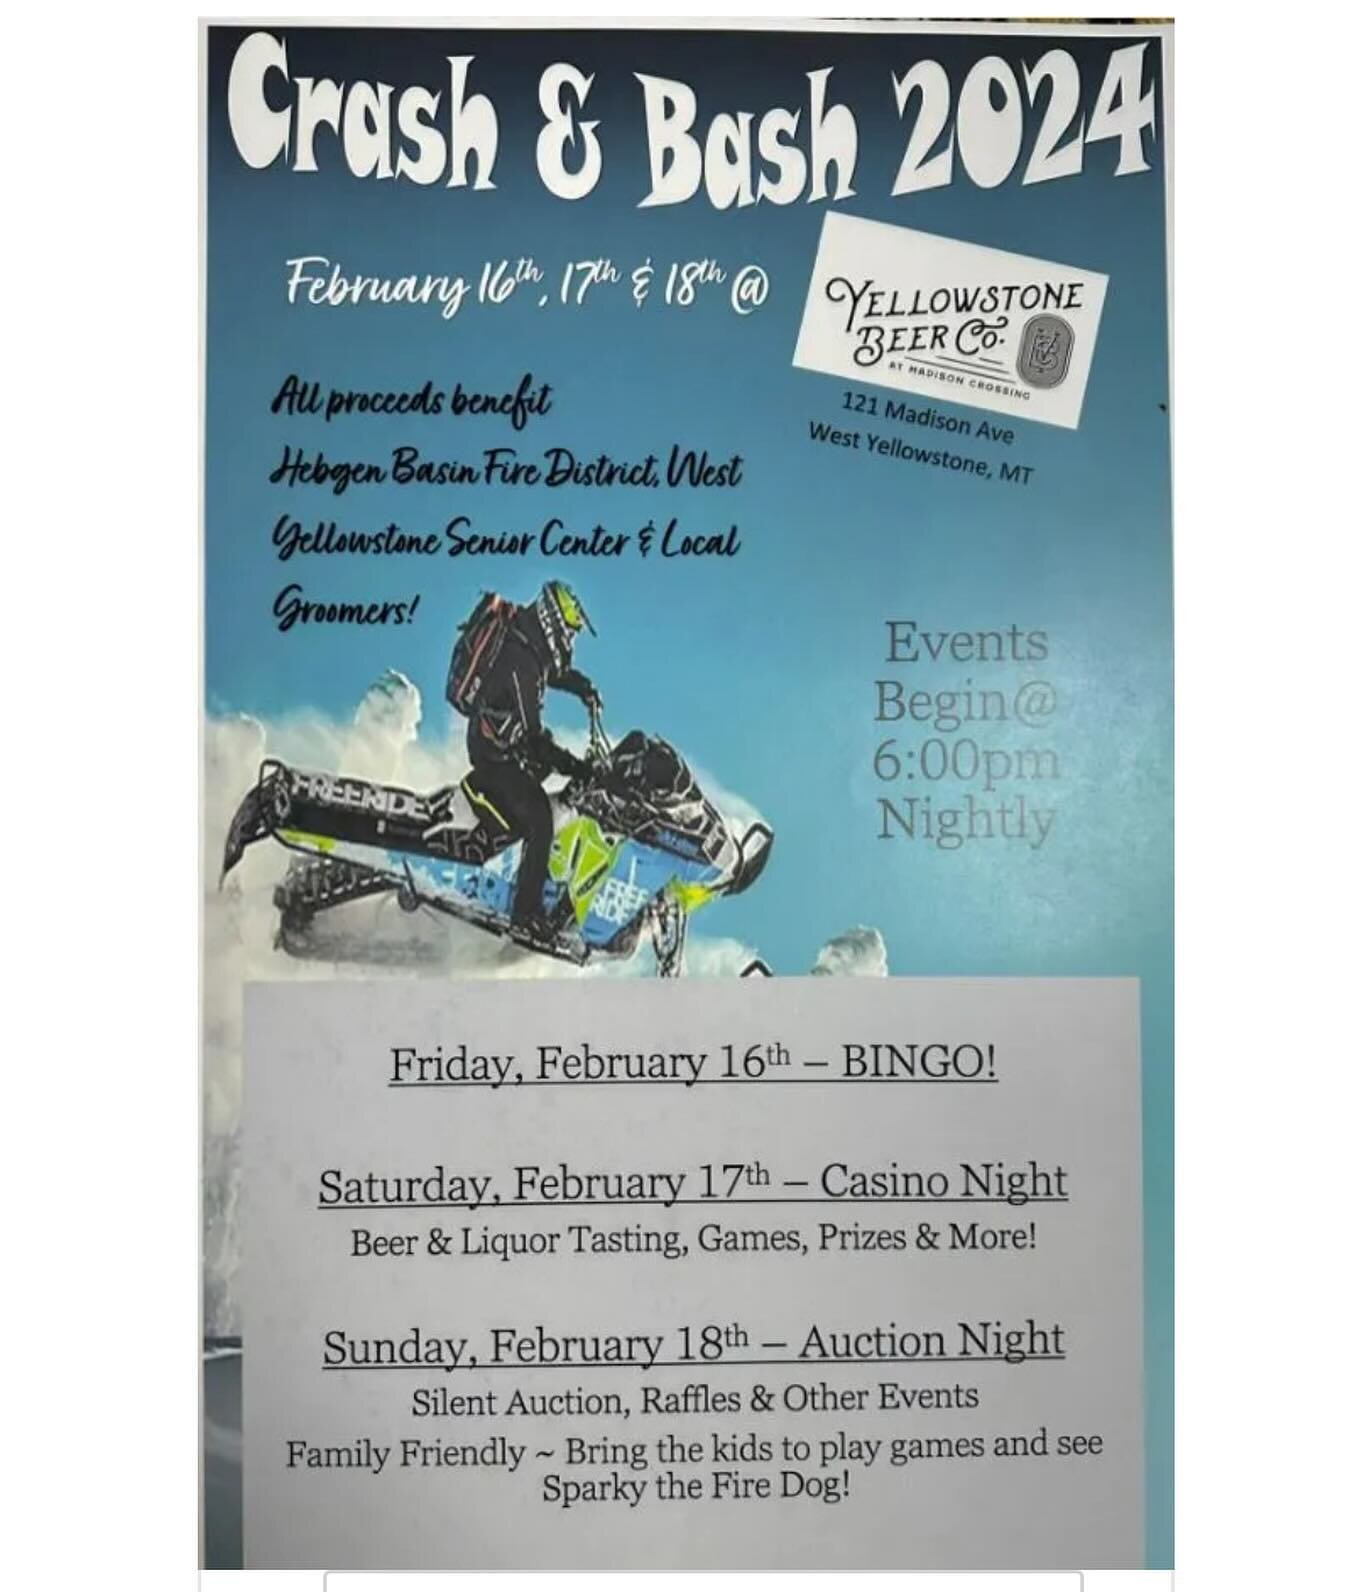 Sending love your way this Valentine&rsquo;s Day! 💕
Wednesday Bingo is postponed to Friday this week as a part of the Crash &amp; Bash Event this weekend; Come join us at Yellowstone Beer Co. and show support for the local Senior Center, Fire Depart